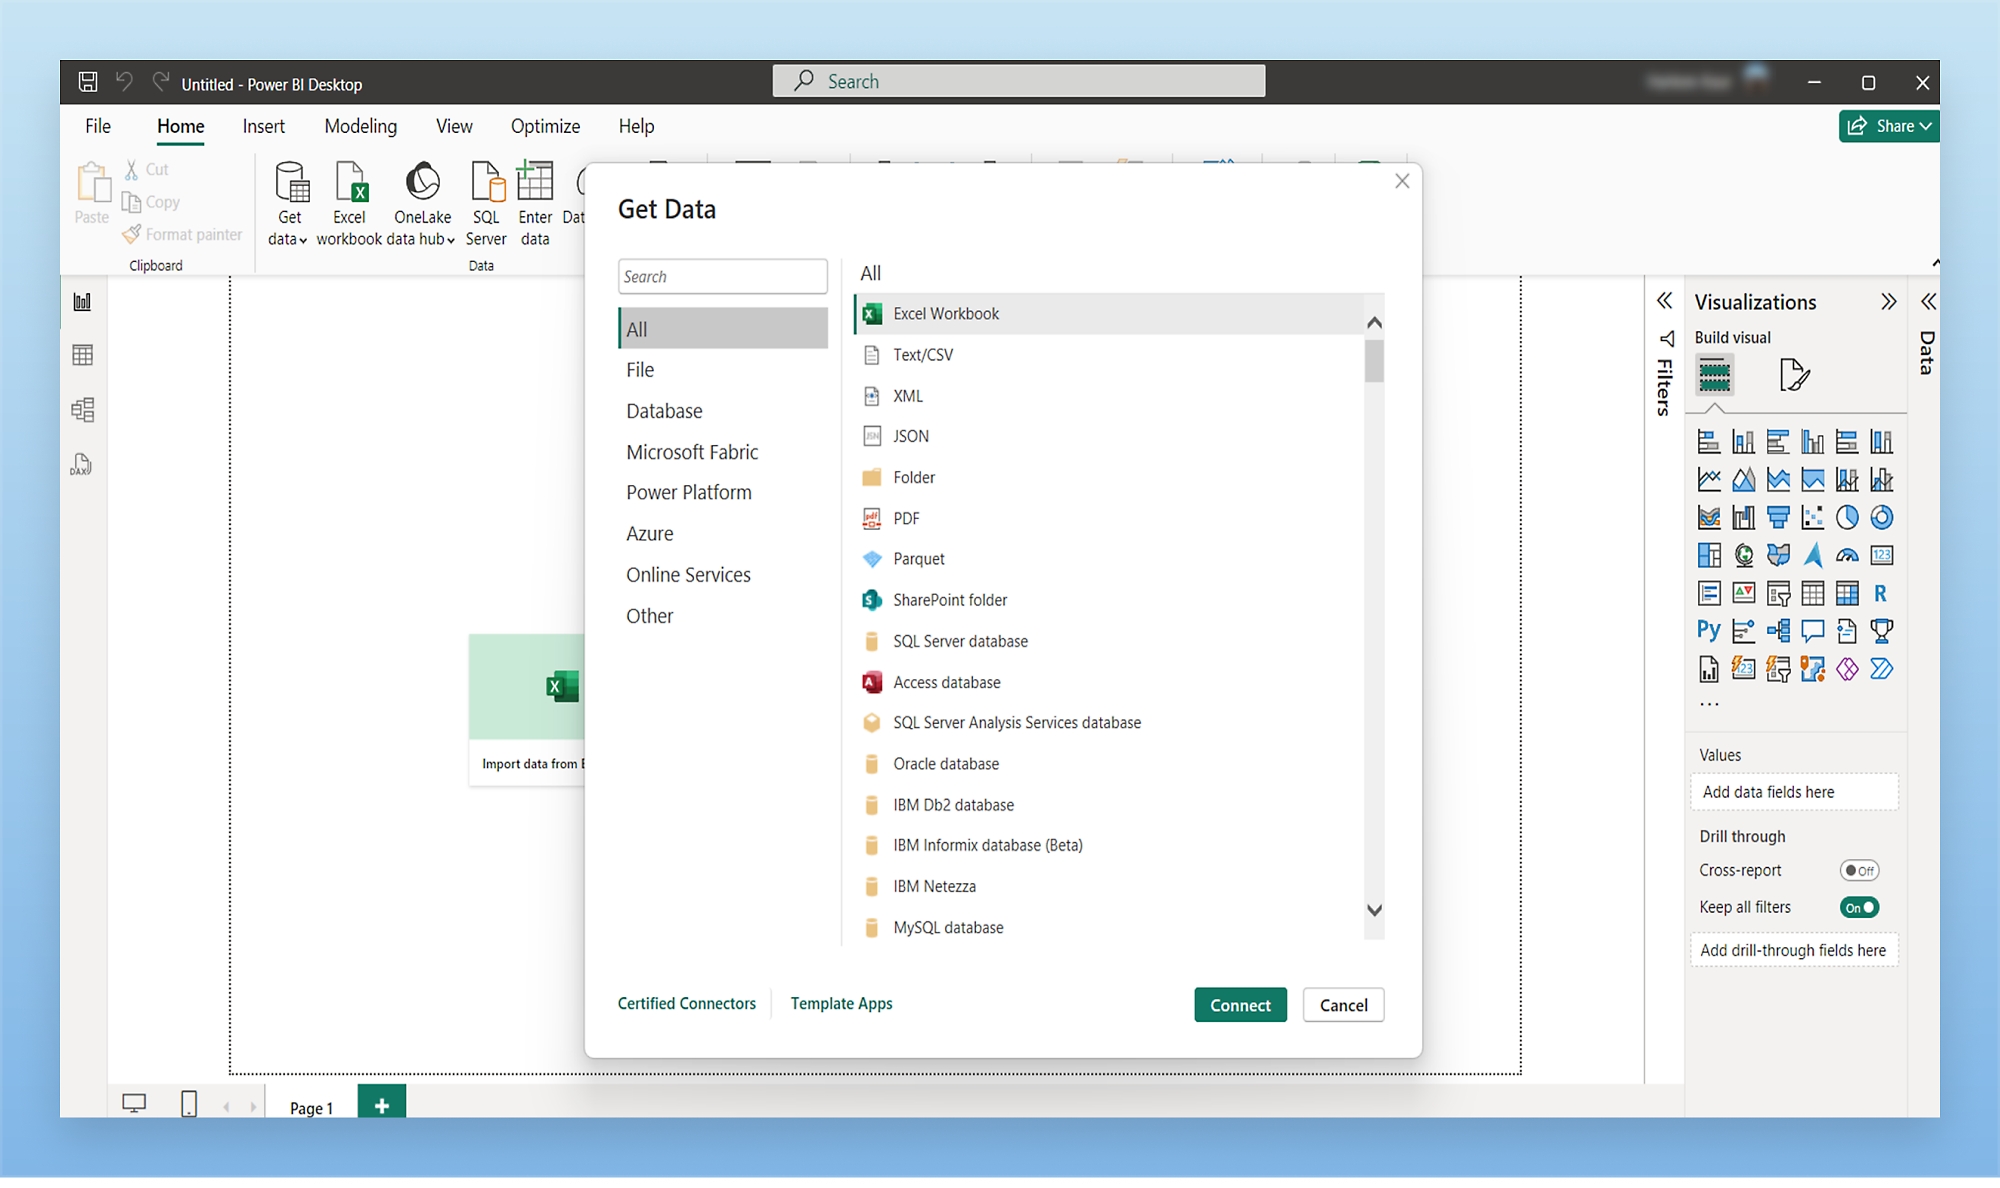 Screenshot of Power BI Desktop showing the "Get Data" interface with various data source options listed.